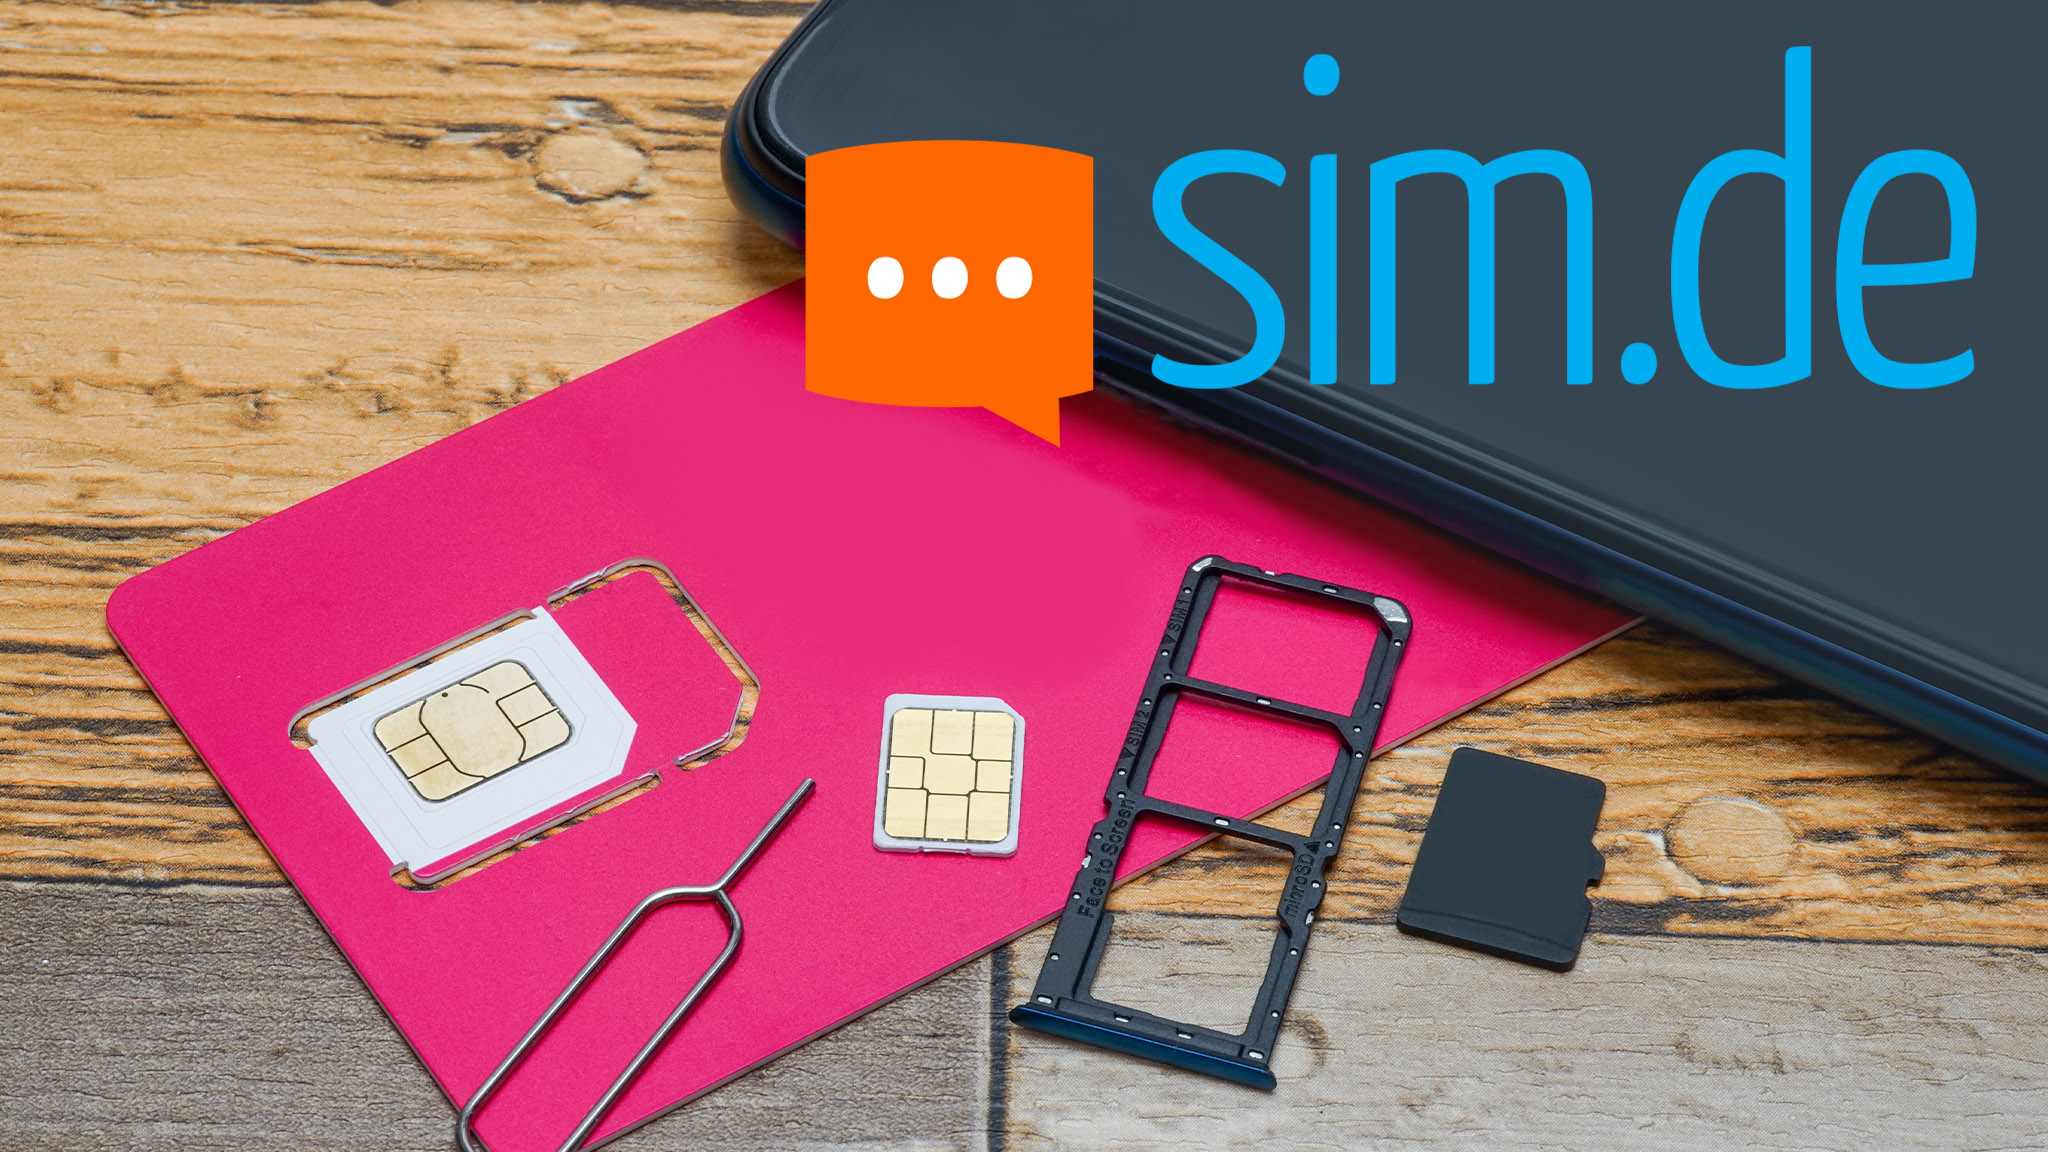 Sim.de offers for frequent surfers: 10 GB for 6.66 €